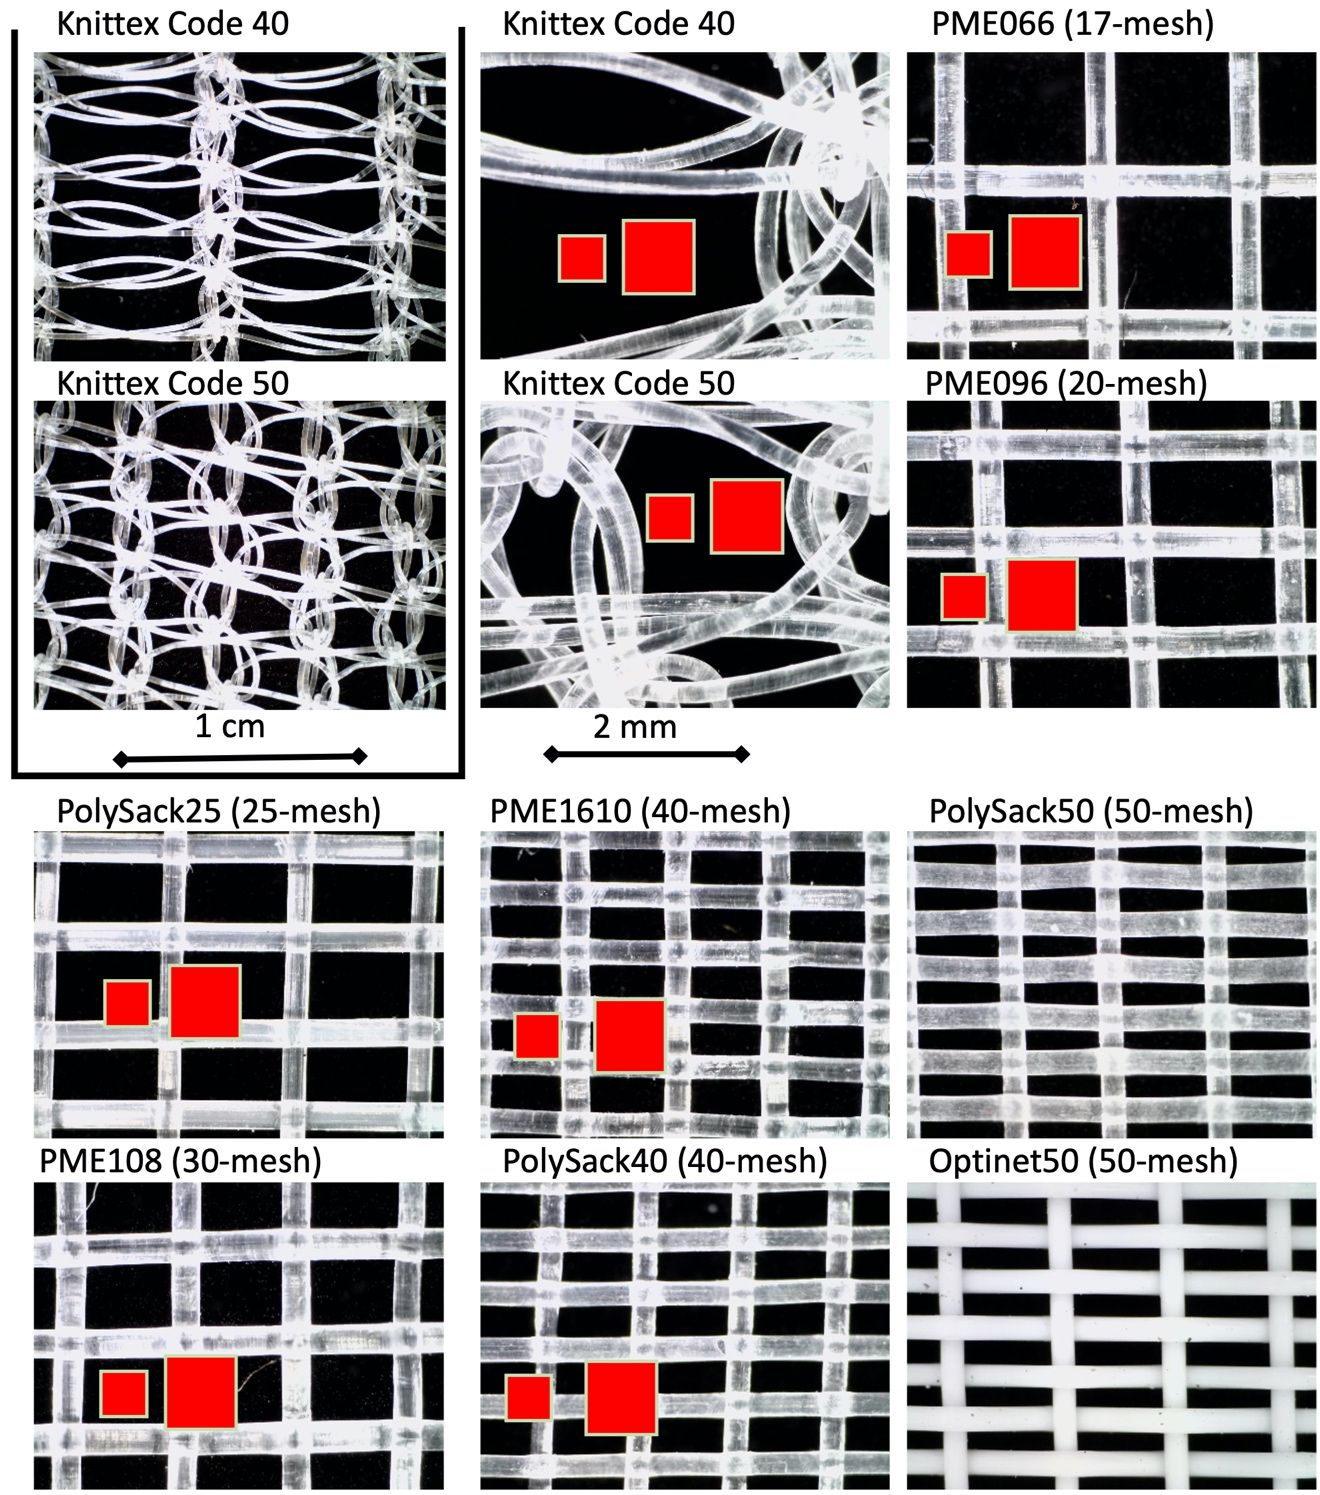 Close-up view of woven screens tested for ability to exclude psyllids. PME1610 and PolySack40 excluded psyllids (see Table 2). Green boxes filled in red represent the minimum and maximum psyllid sizes measured for this study. Code 40 and Code 50 woven screens were not tested, but openings were larger than the largest tested screen. PolySack50 and Optinet50 are 50-mesh screens with openings smaller than the smallest tested screen.